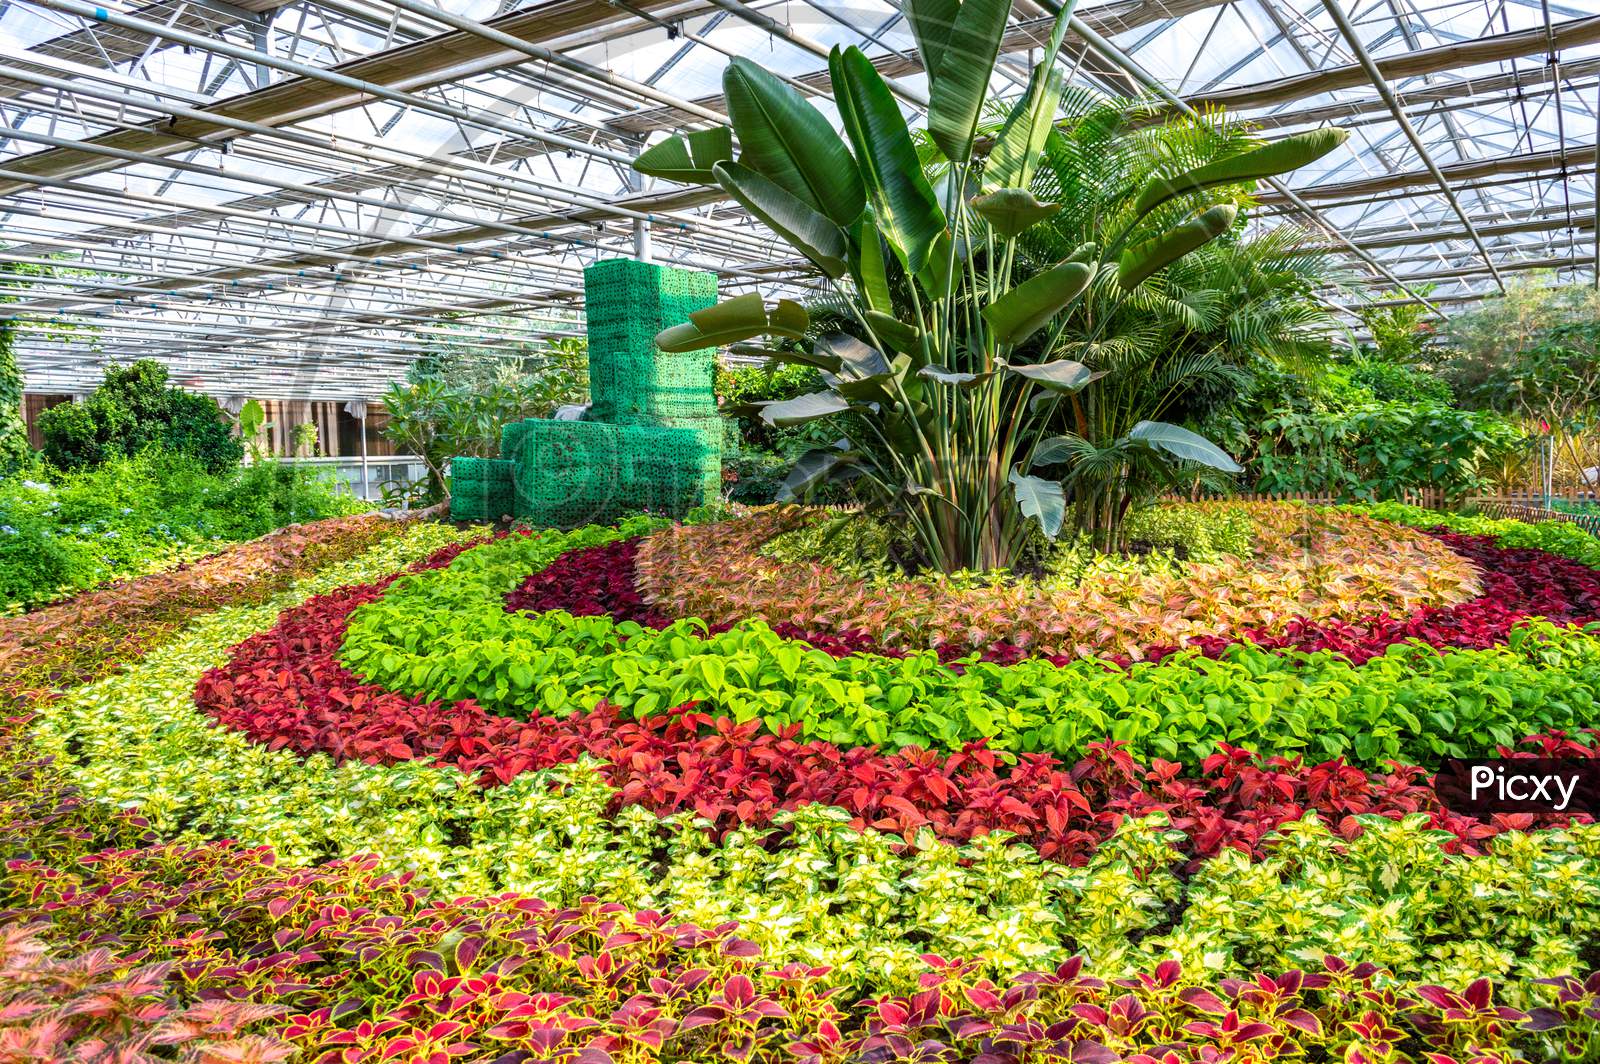 Flower Plantation In A Greenhouse Image Stock